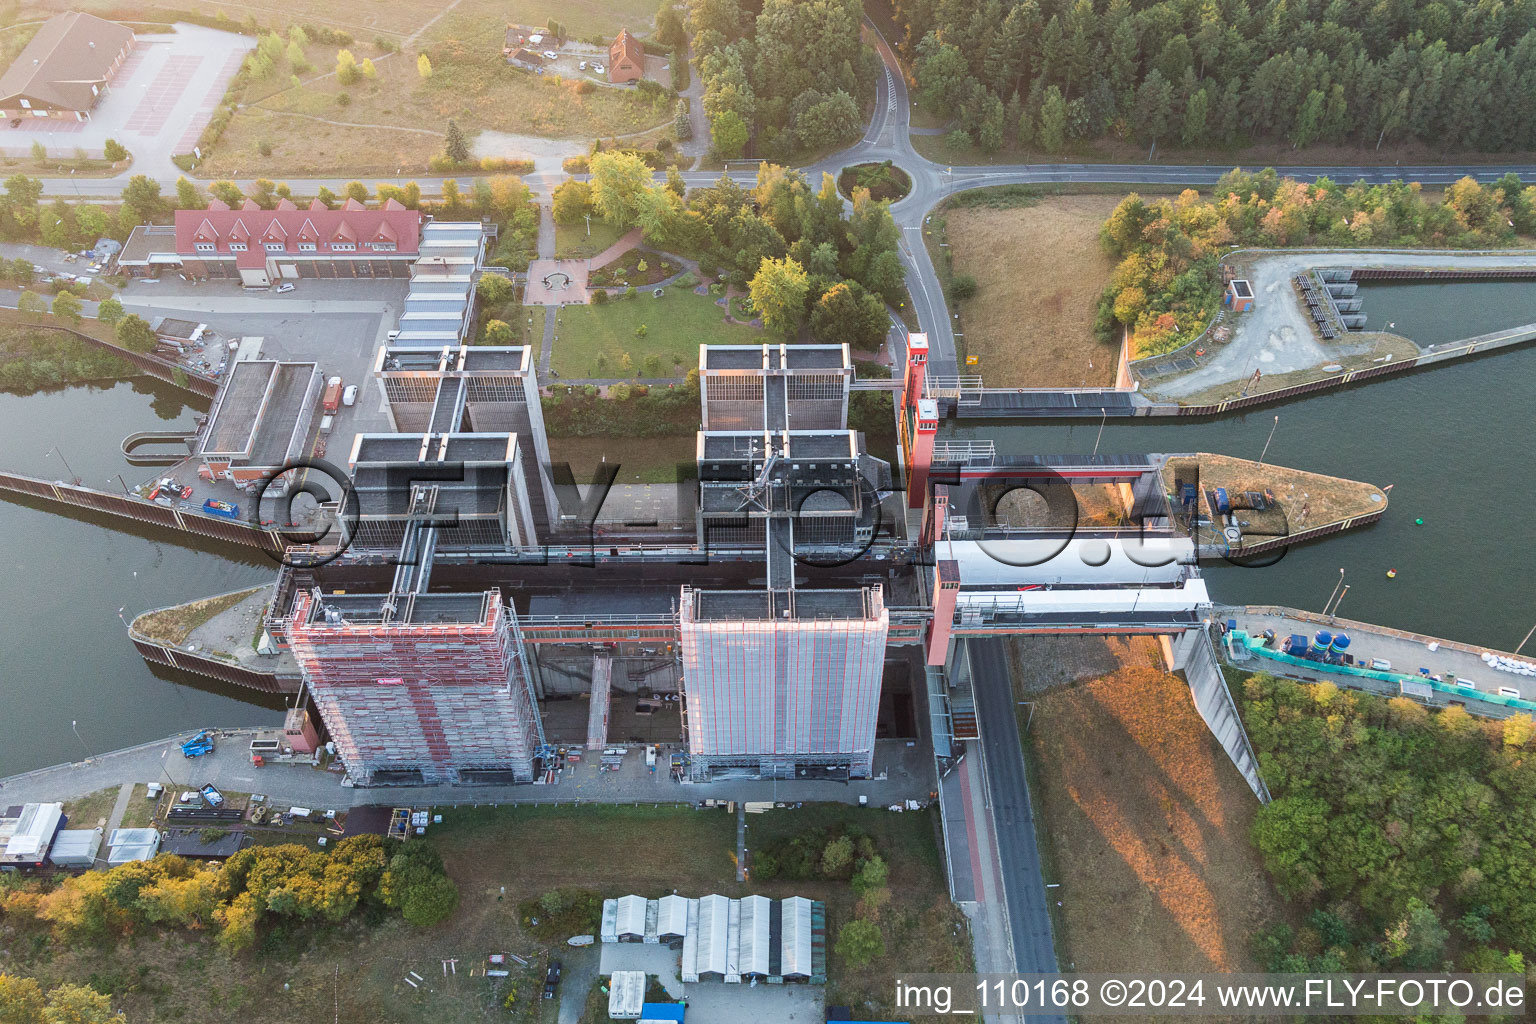 Drone recording of Boat lift and locks plants on the banks of the waterway of the Elbe side channel in Scharnebeck in the state Lower Saxony, Germany